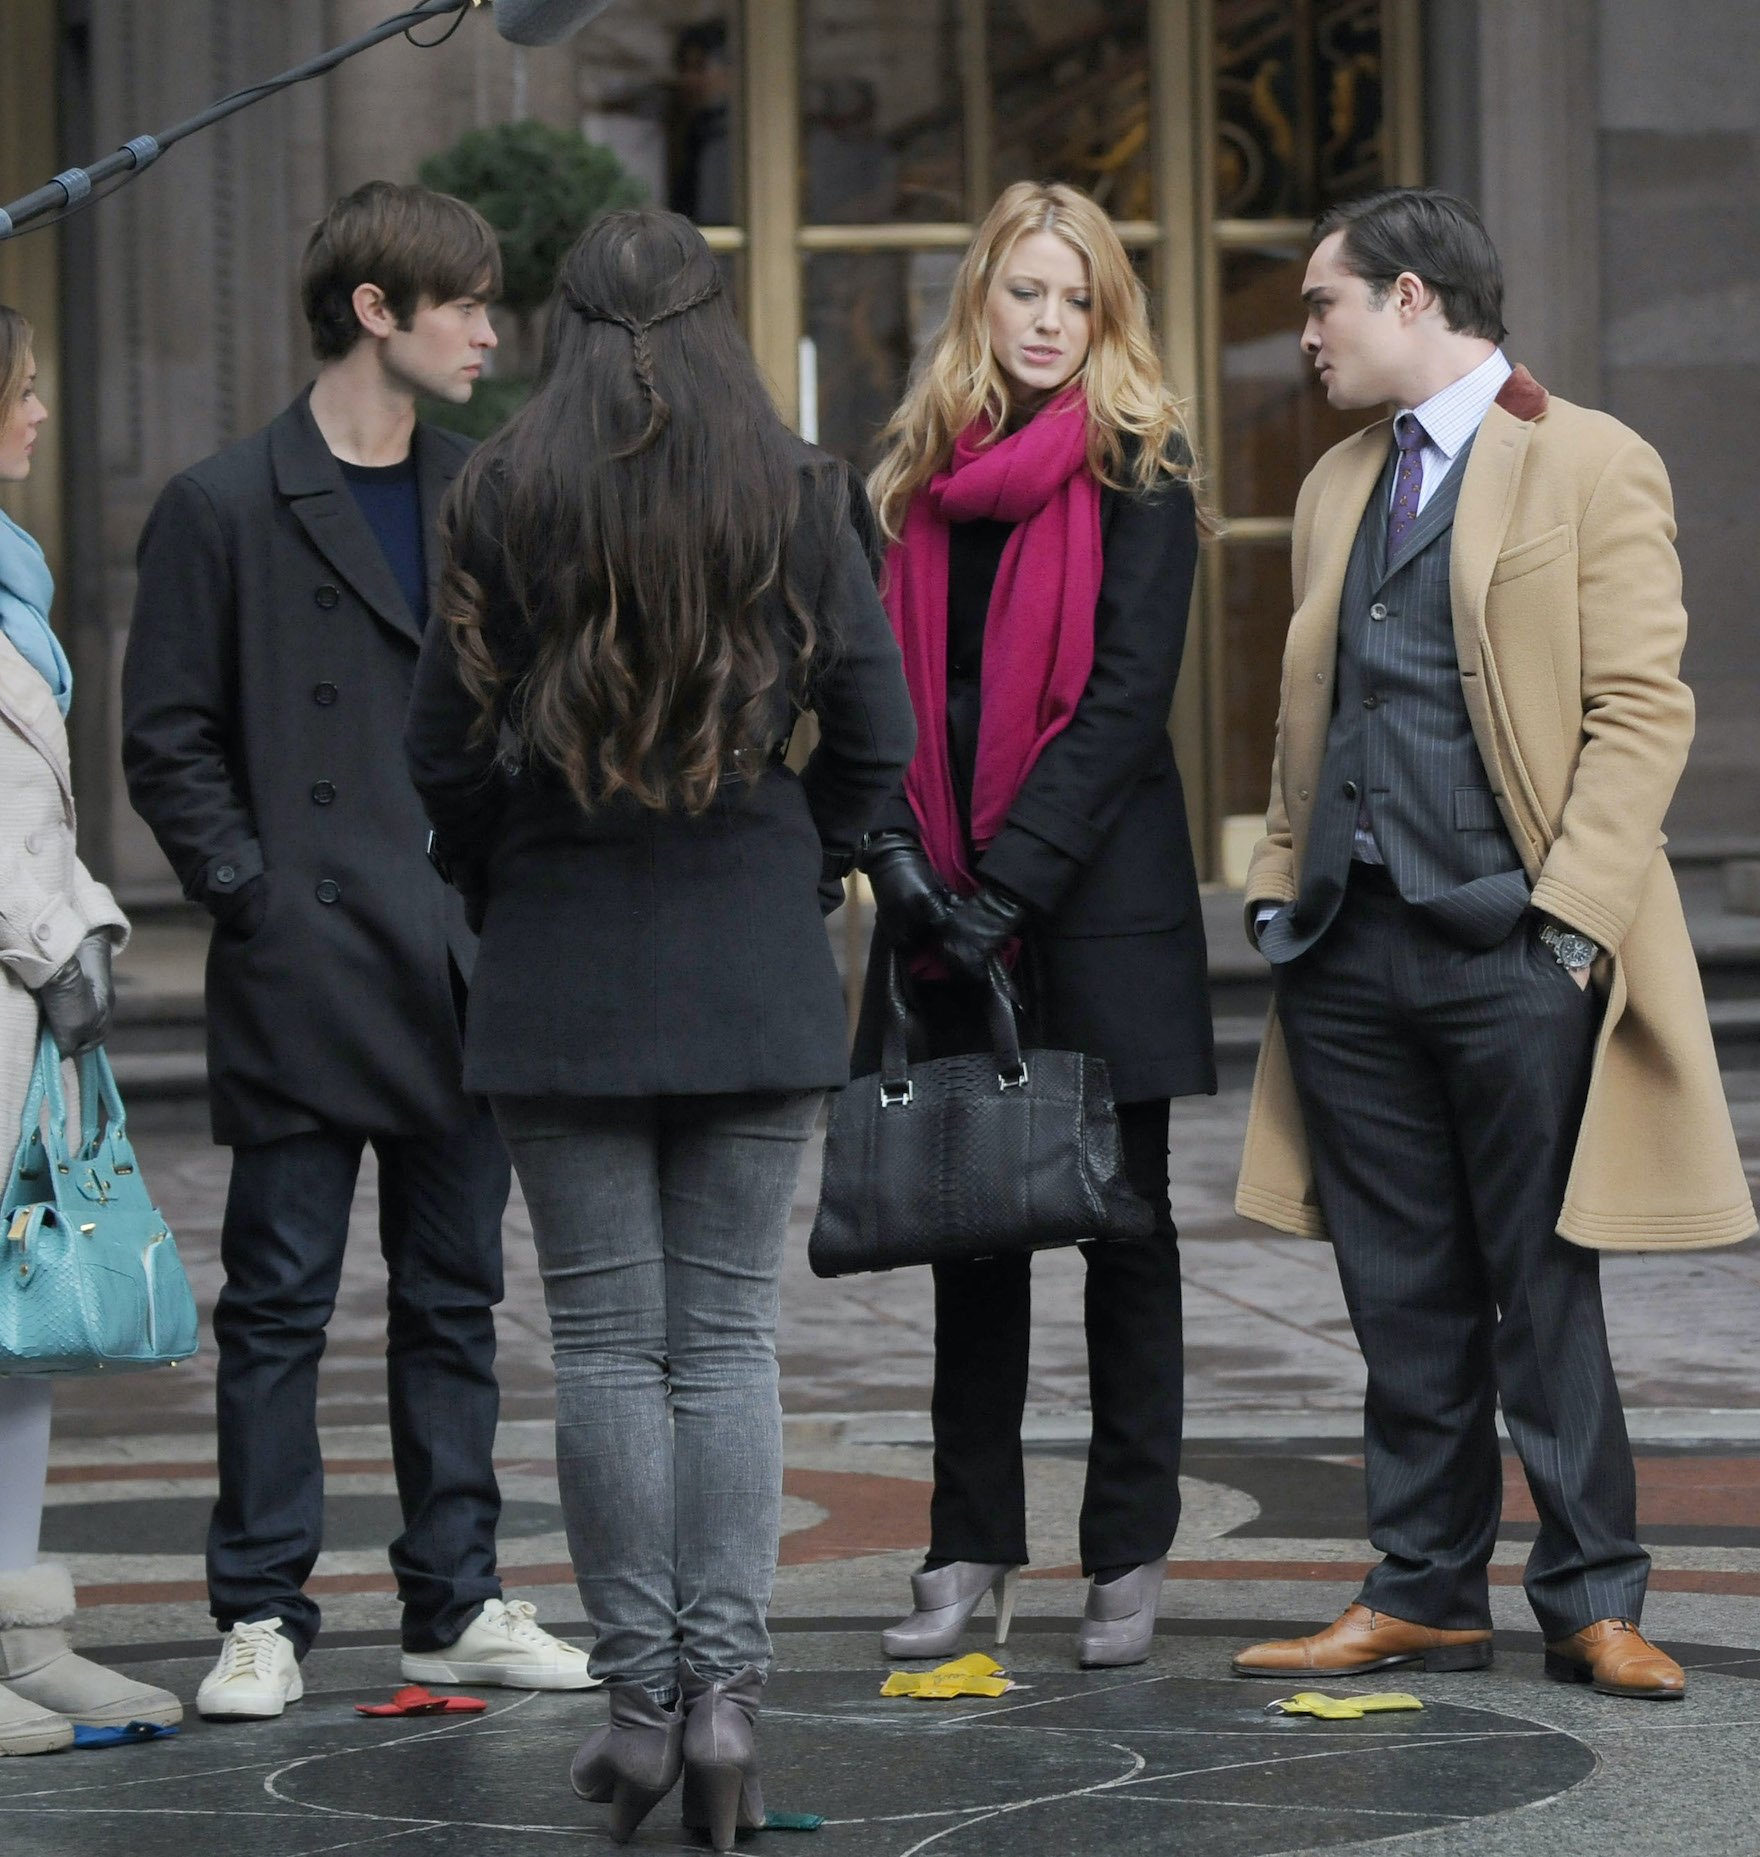 Leighton meester, Chace Crawford, Blake Lively, and Ed Westwick filming a scene from 'Gossip Girl' outside the Palace Hotel